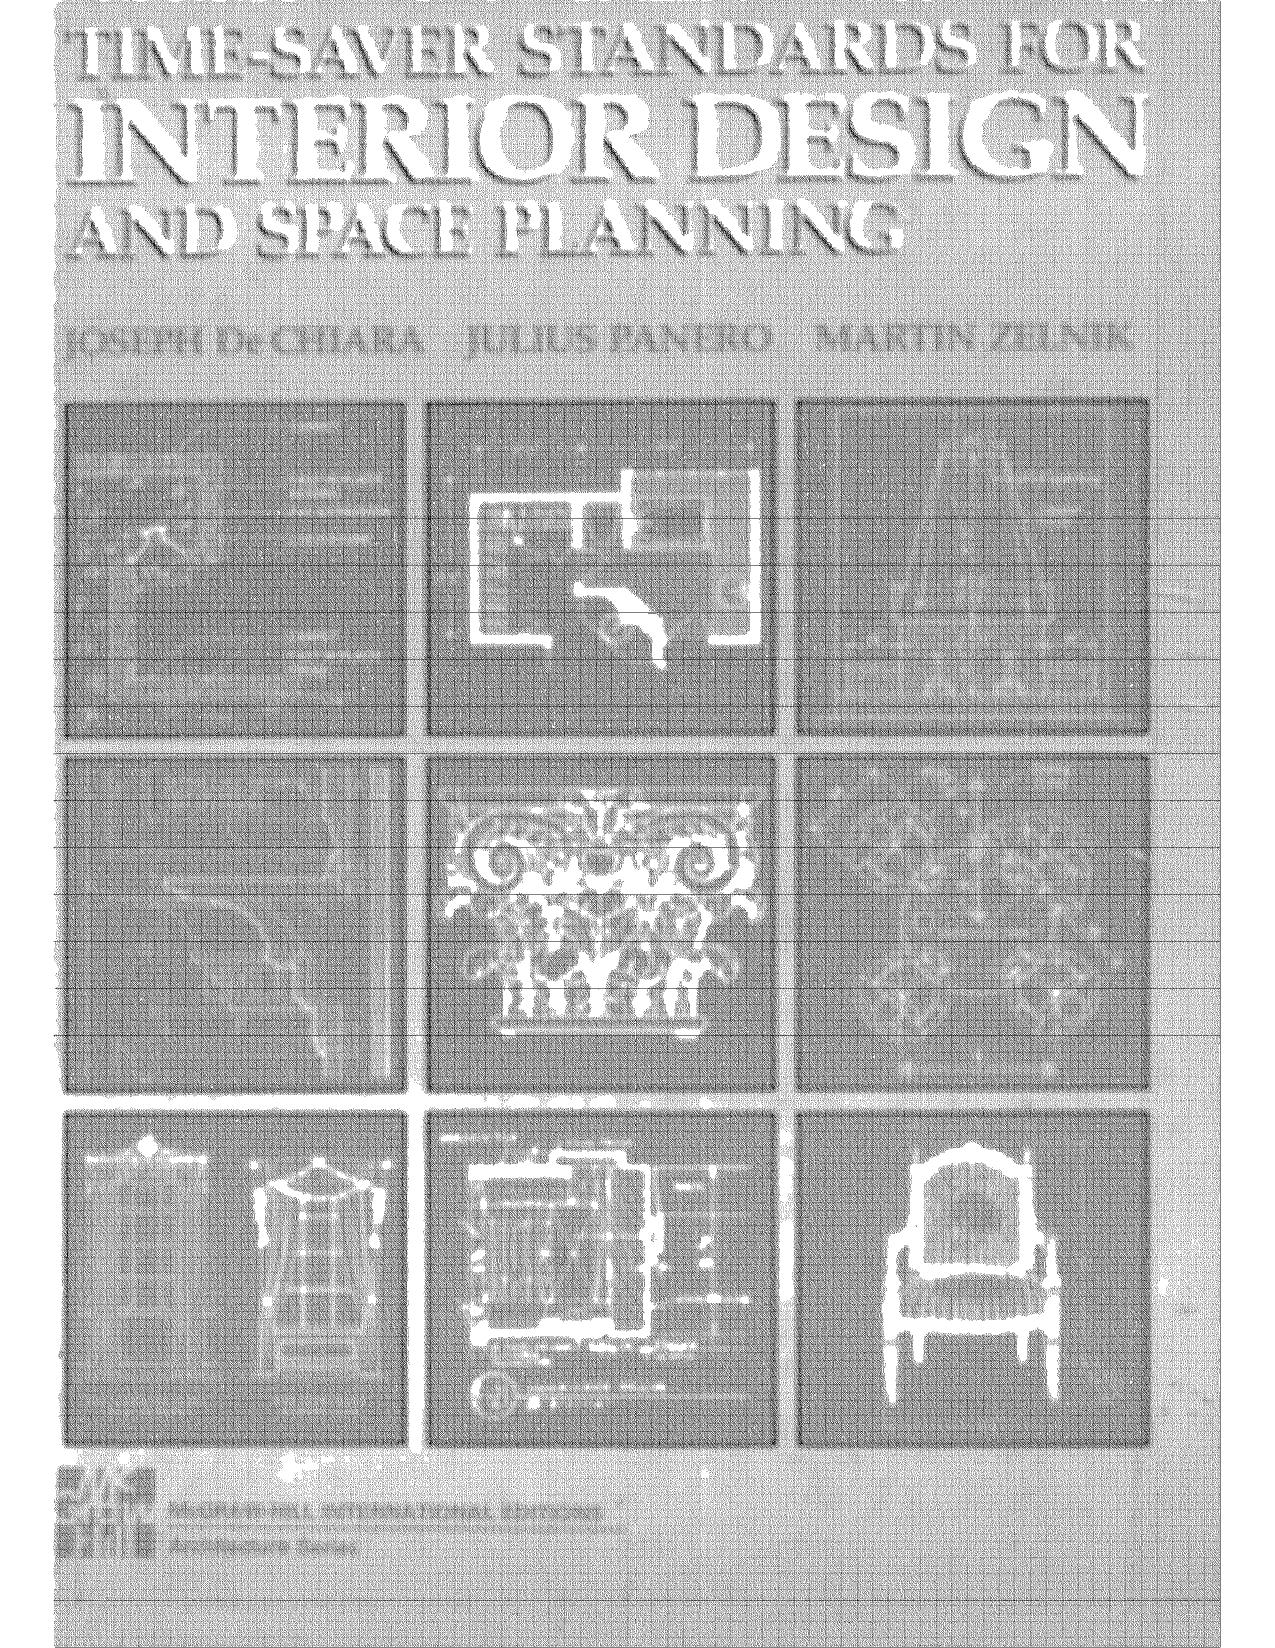 Standards for Interior Design and Space Planning  1992